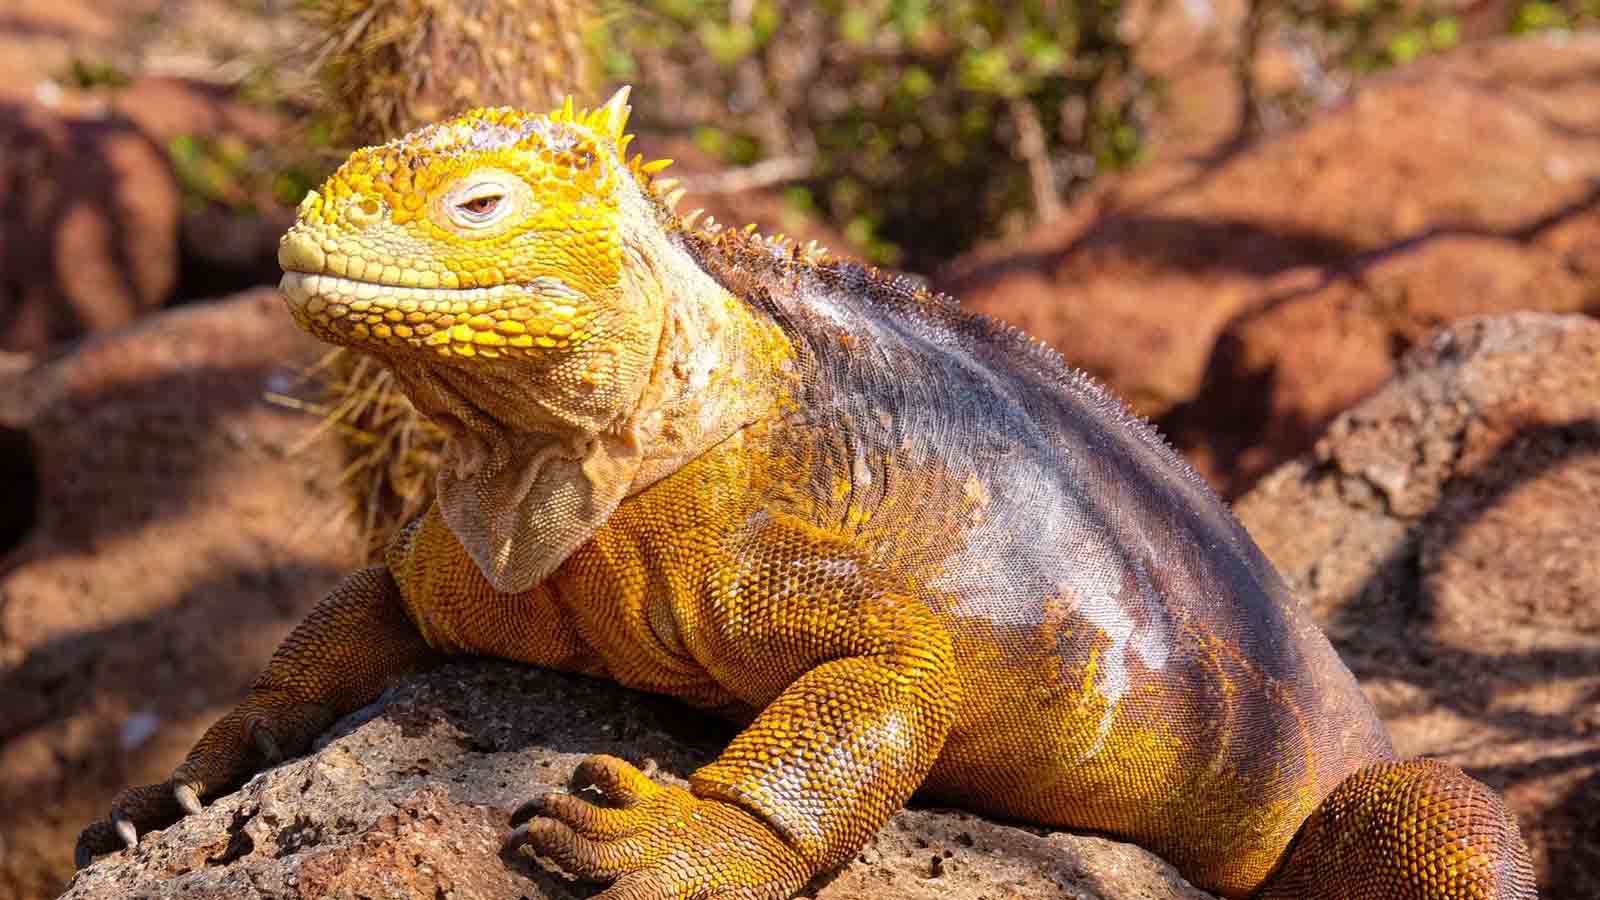  Galapagos | After nearly 200 years of extermination, land iguanas were reintroduced to Santiago Island in Galapagos